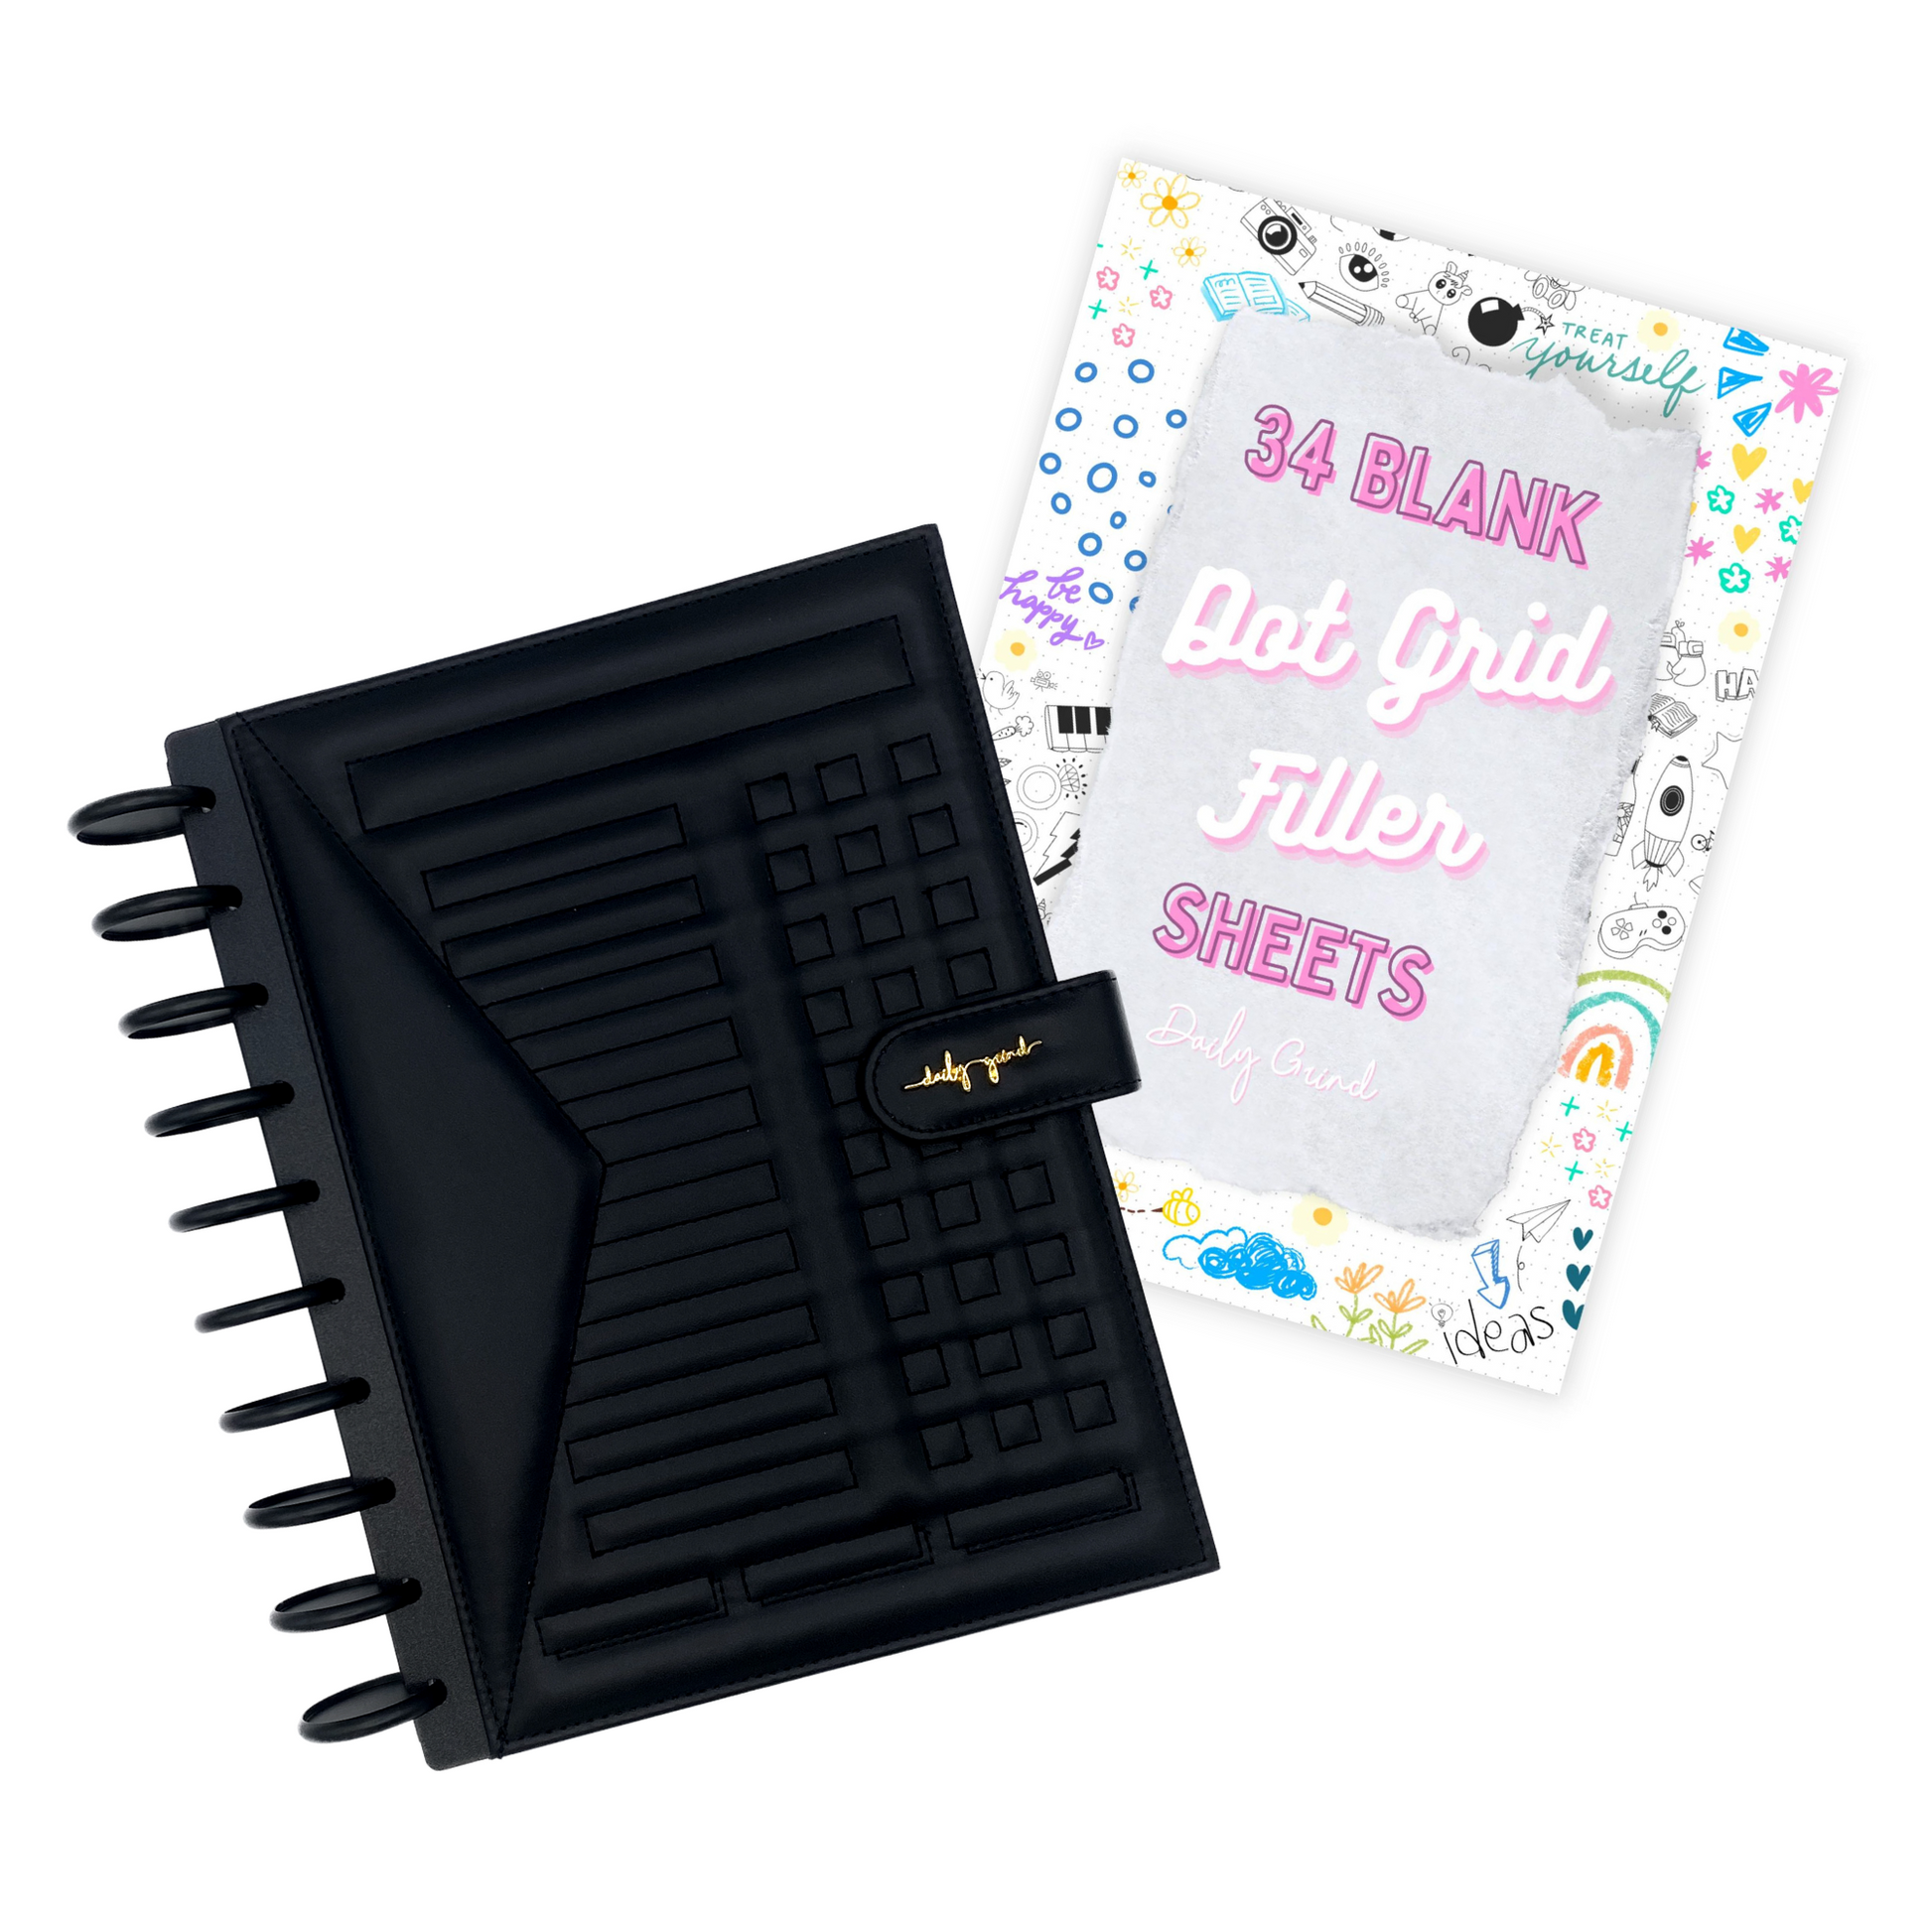 "34 Blank Dot Grid Filler Sheets" cover page and black planner